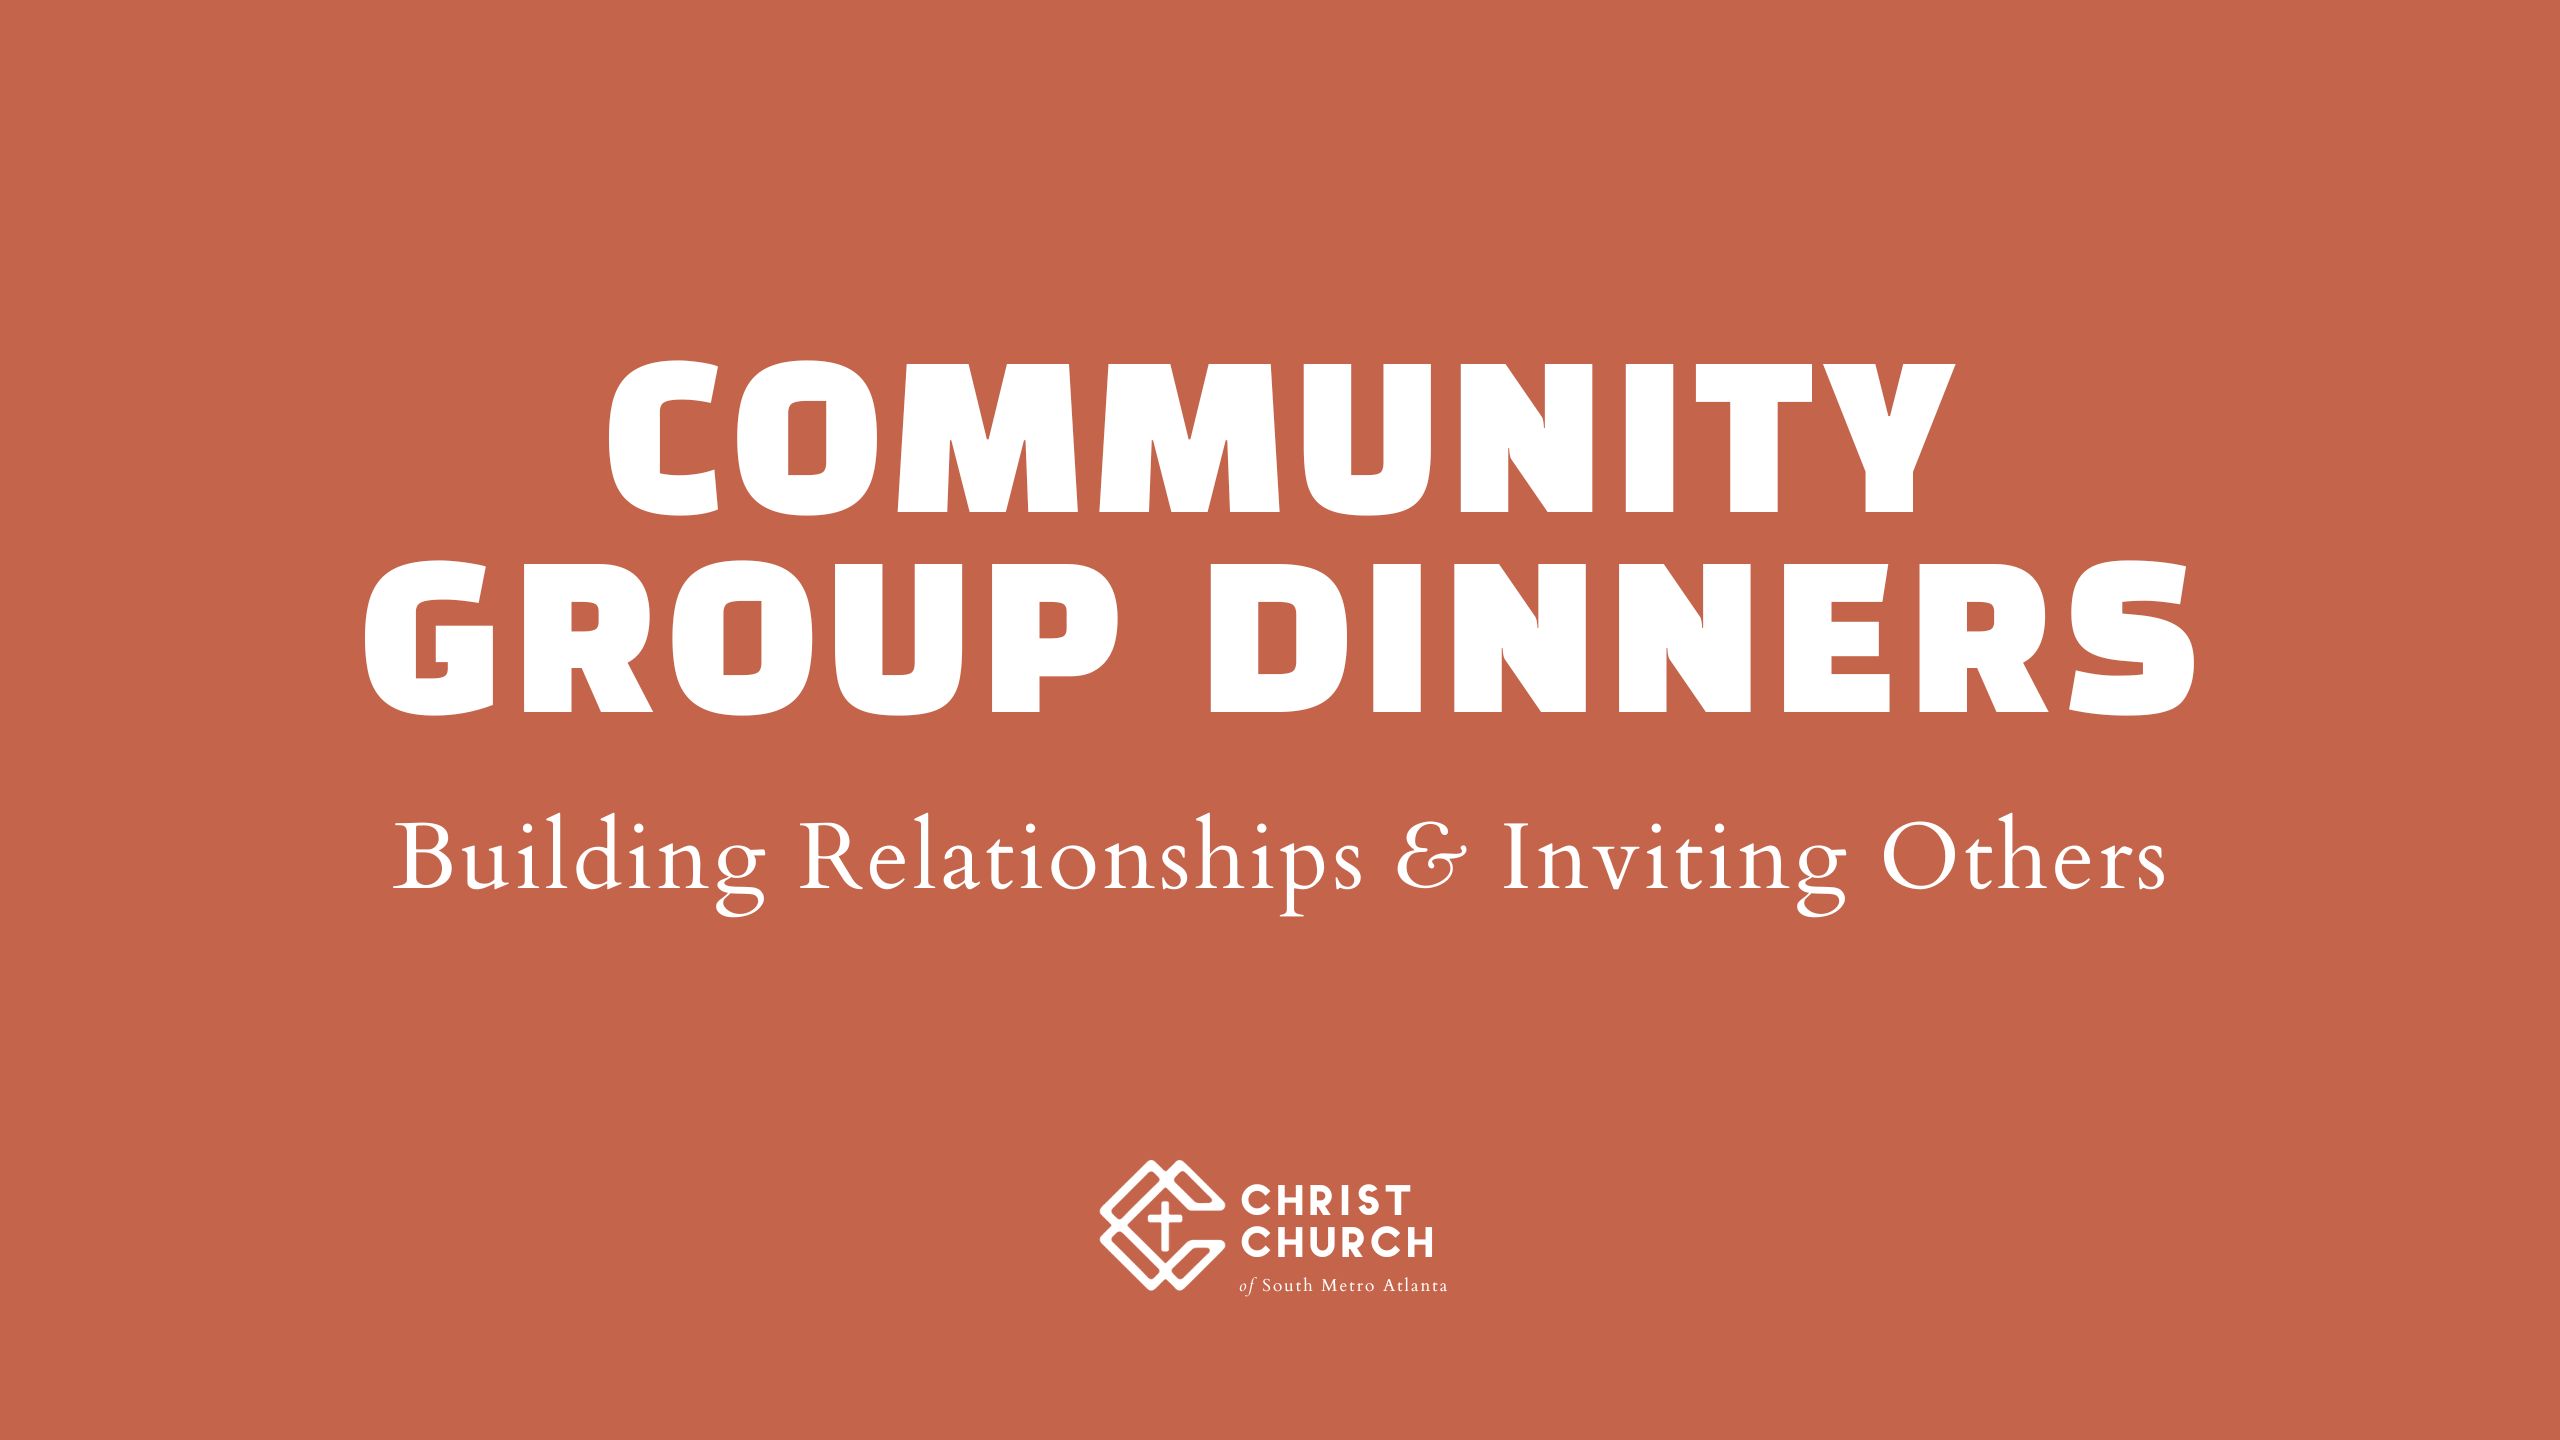 Community Groups Dinners image